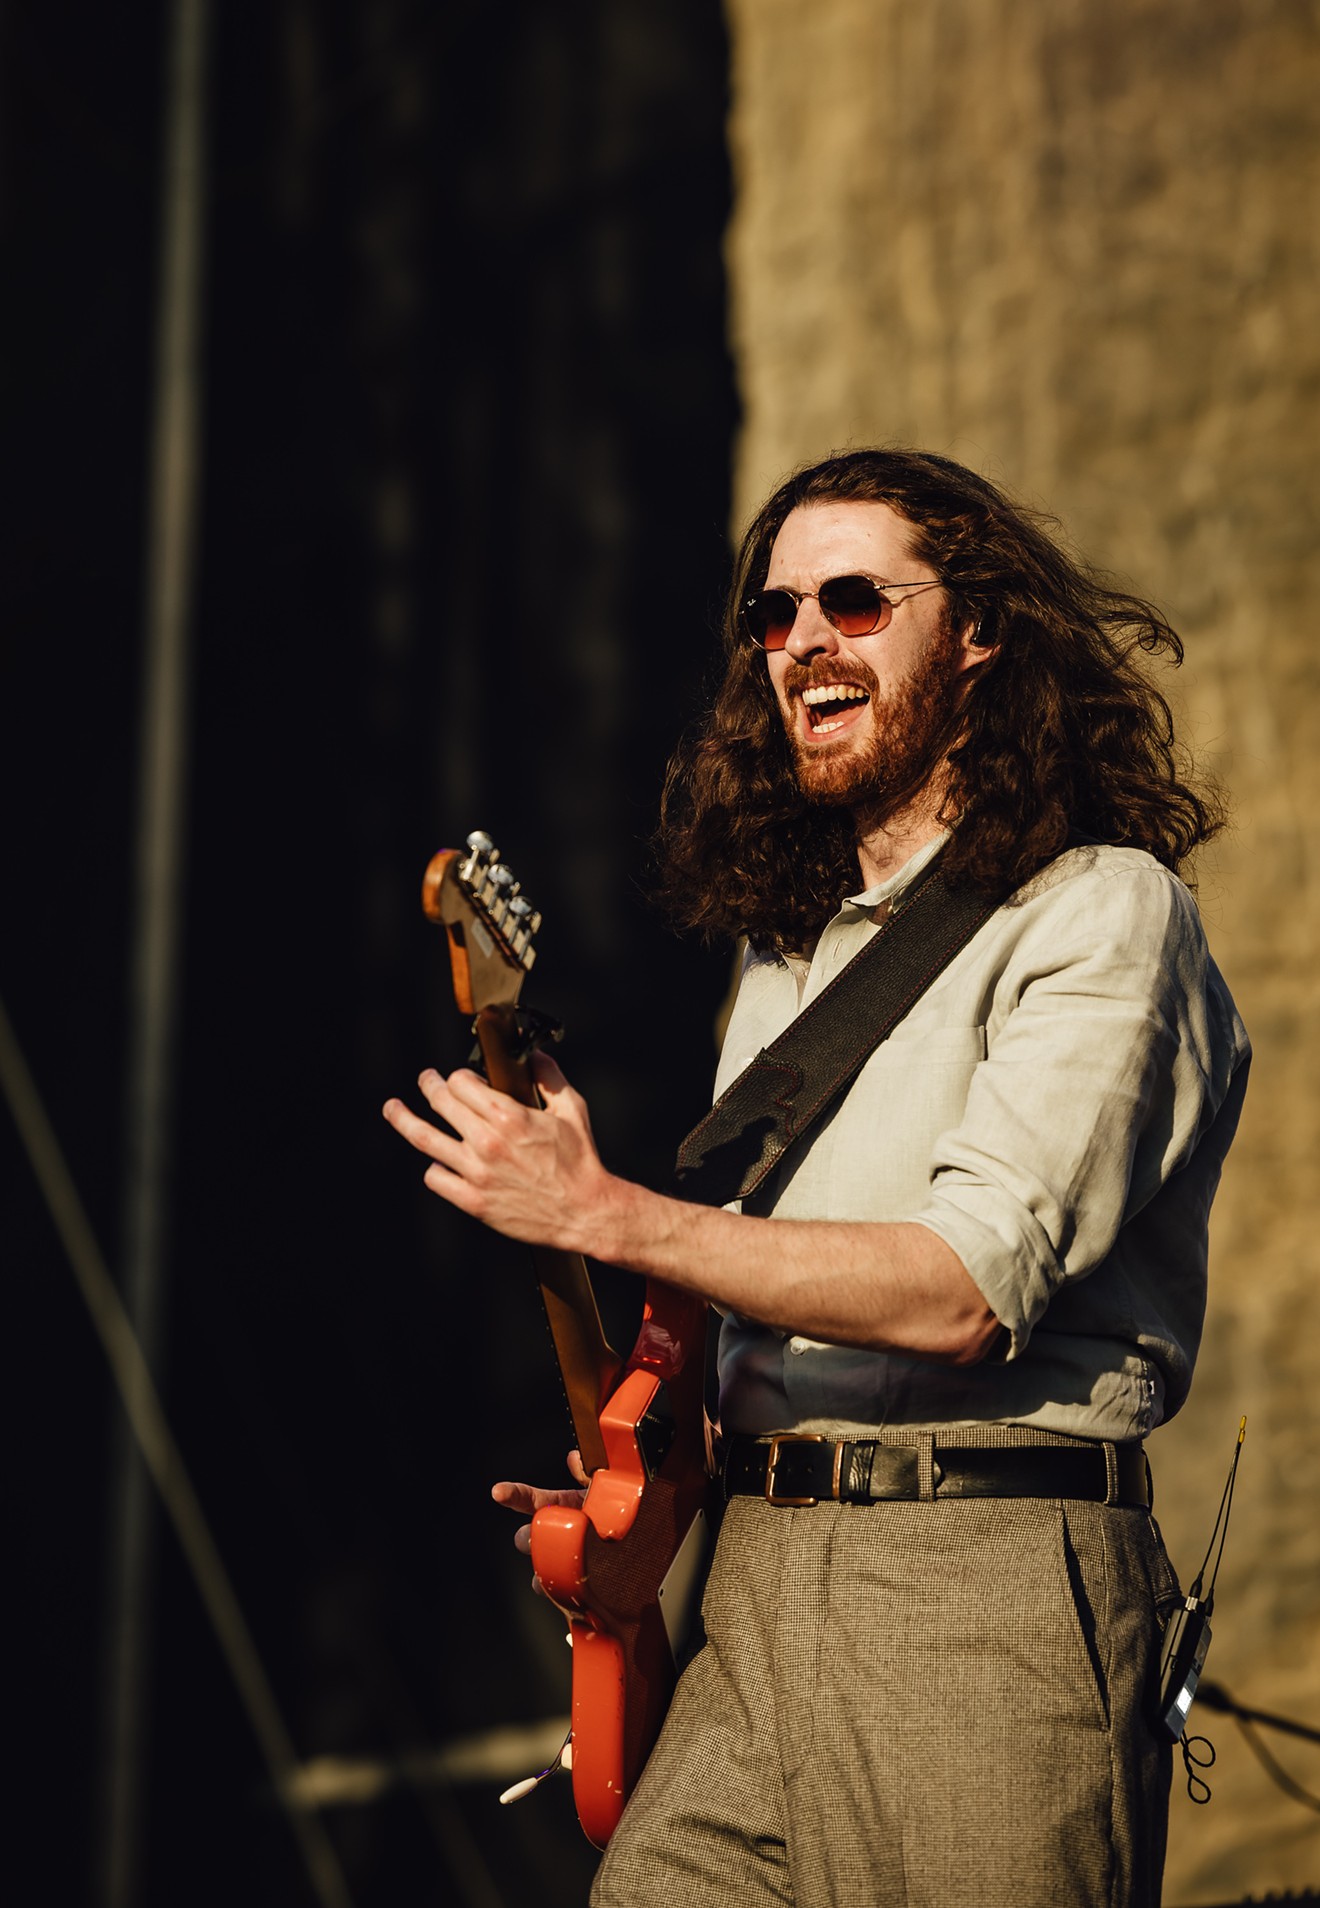 Hozier took everyone at ACL Fest to church this year. But he's also so much more than that song.